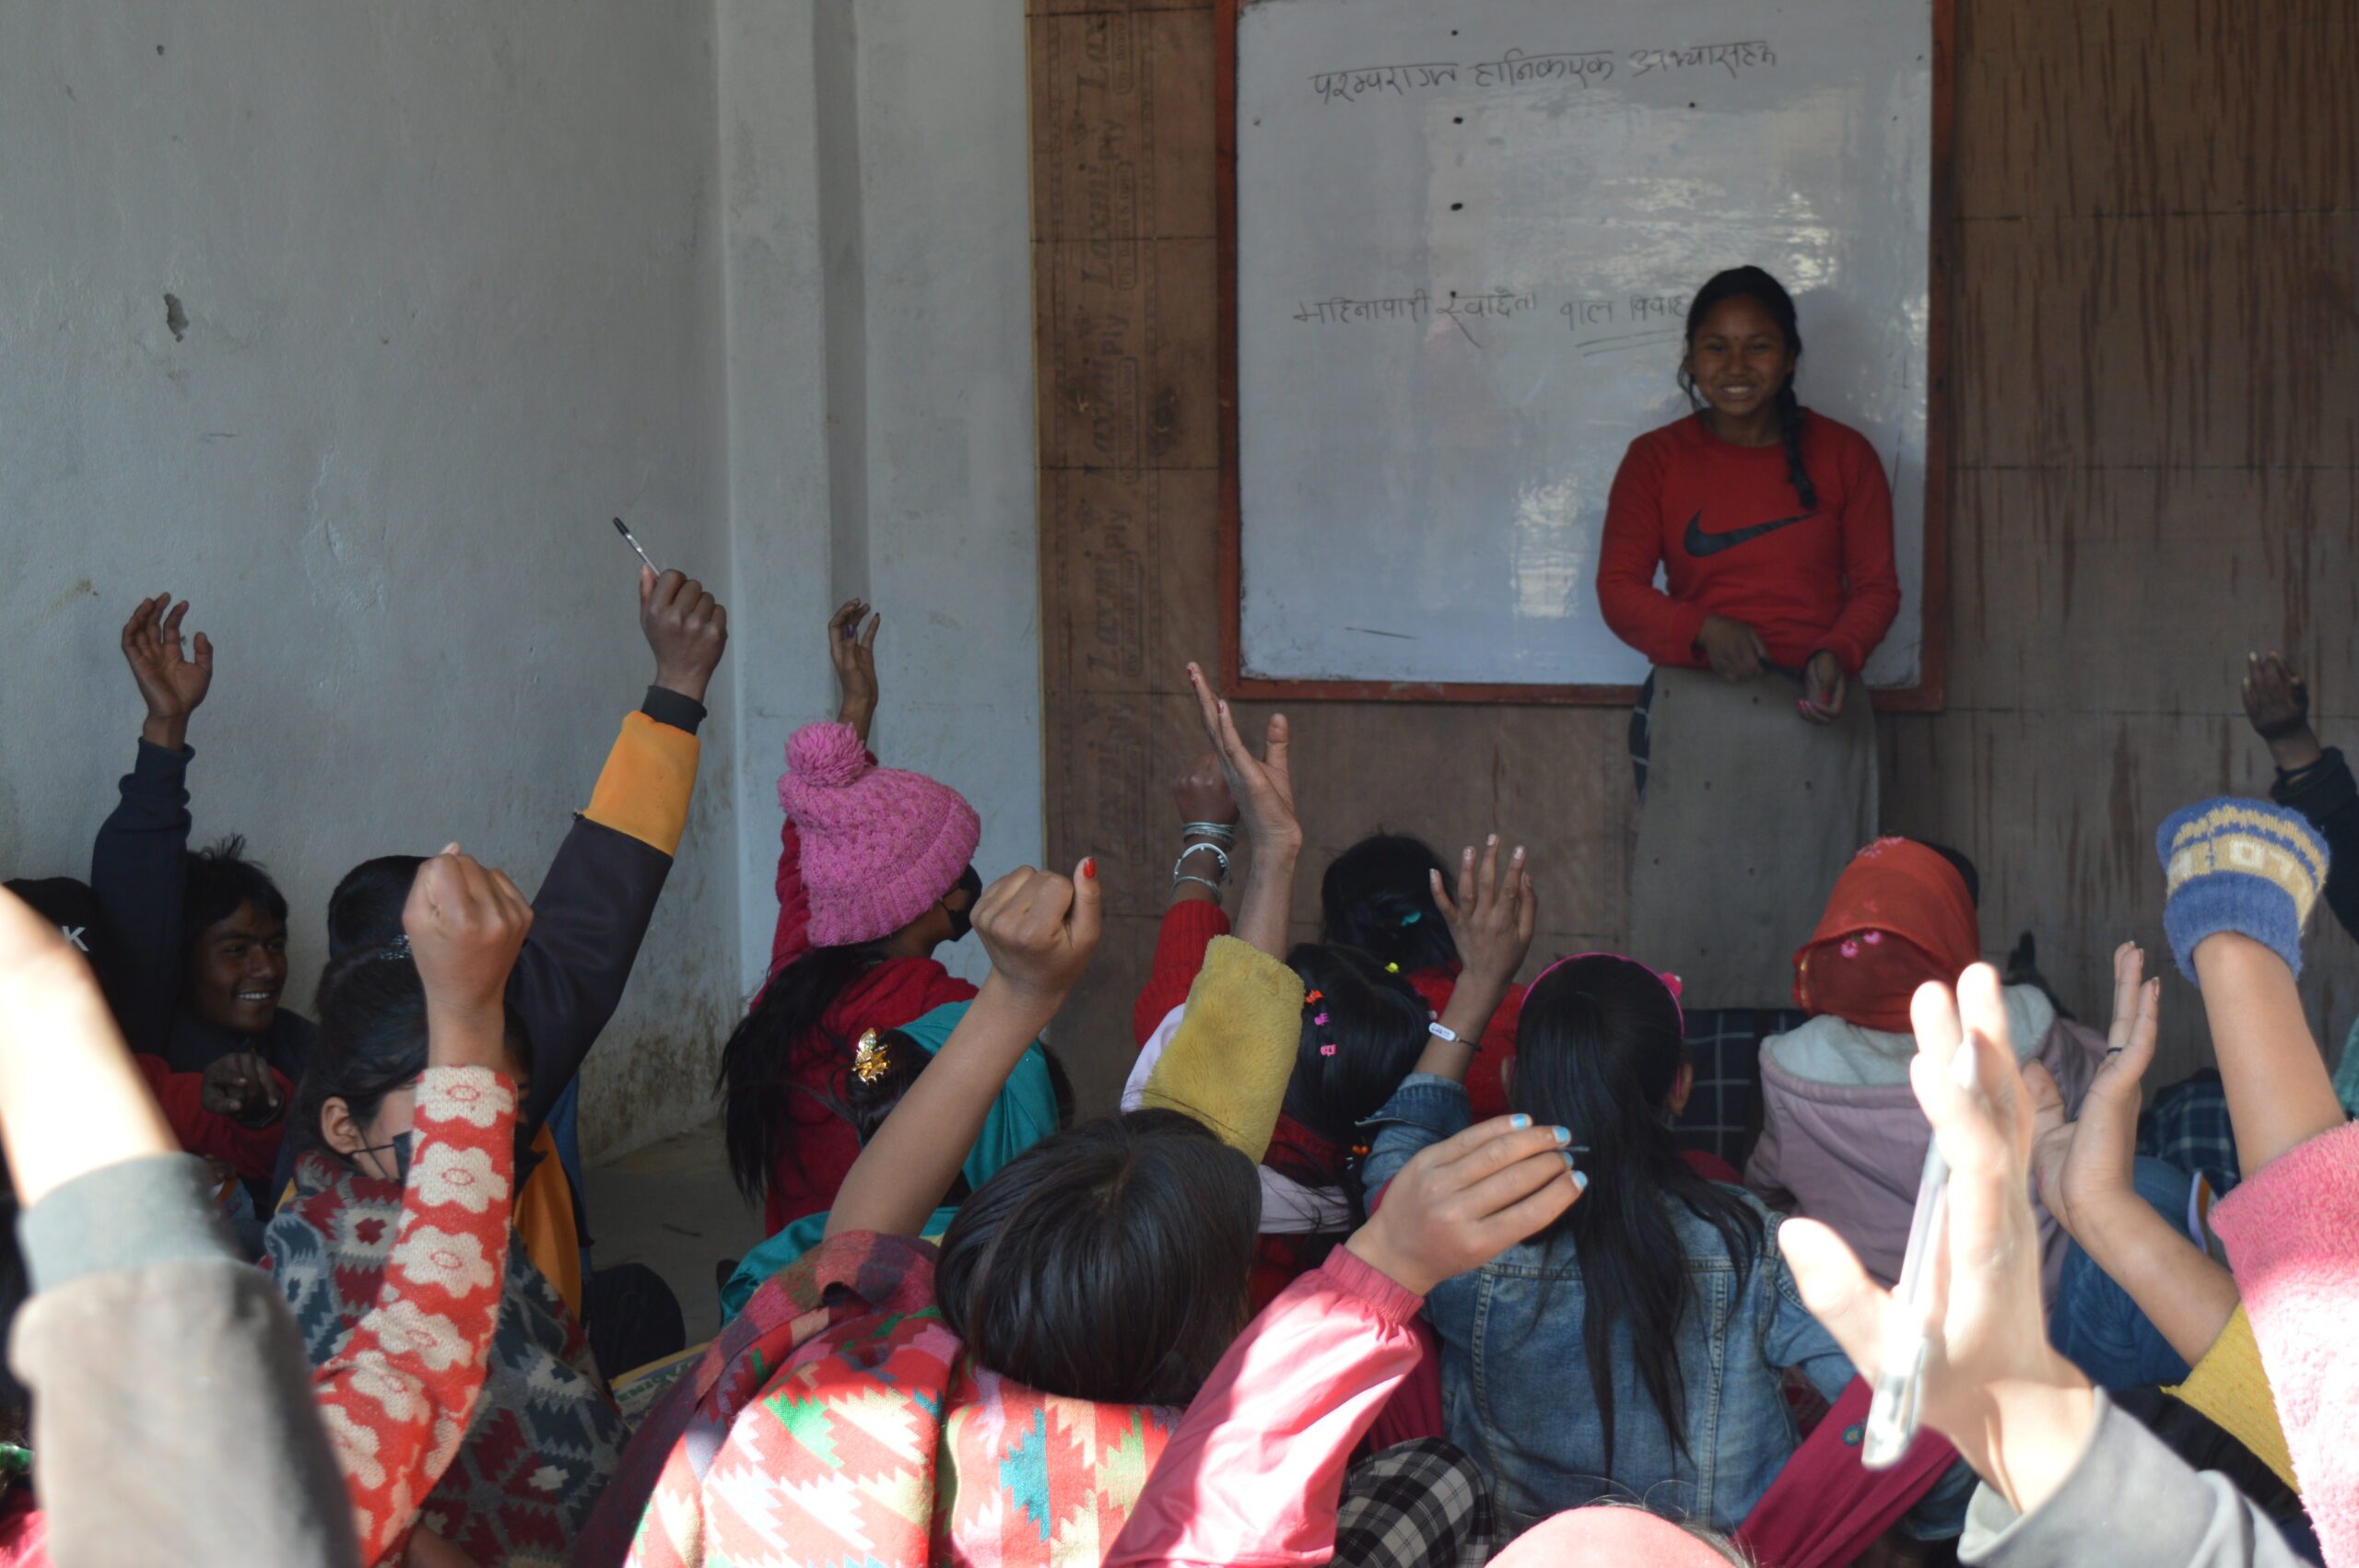 Attima talking at the front of a group session, with a group of girls raising their hands.